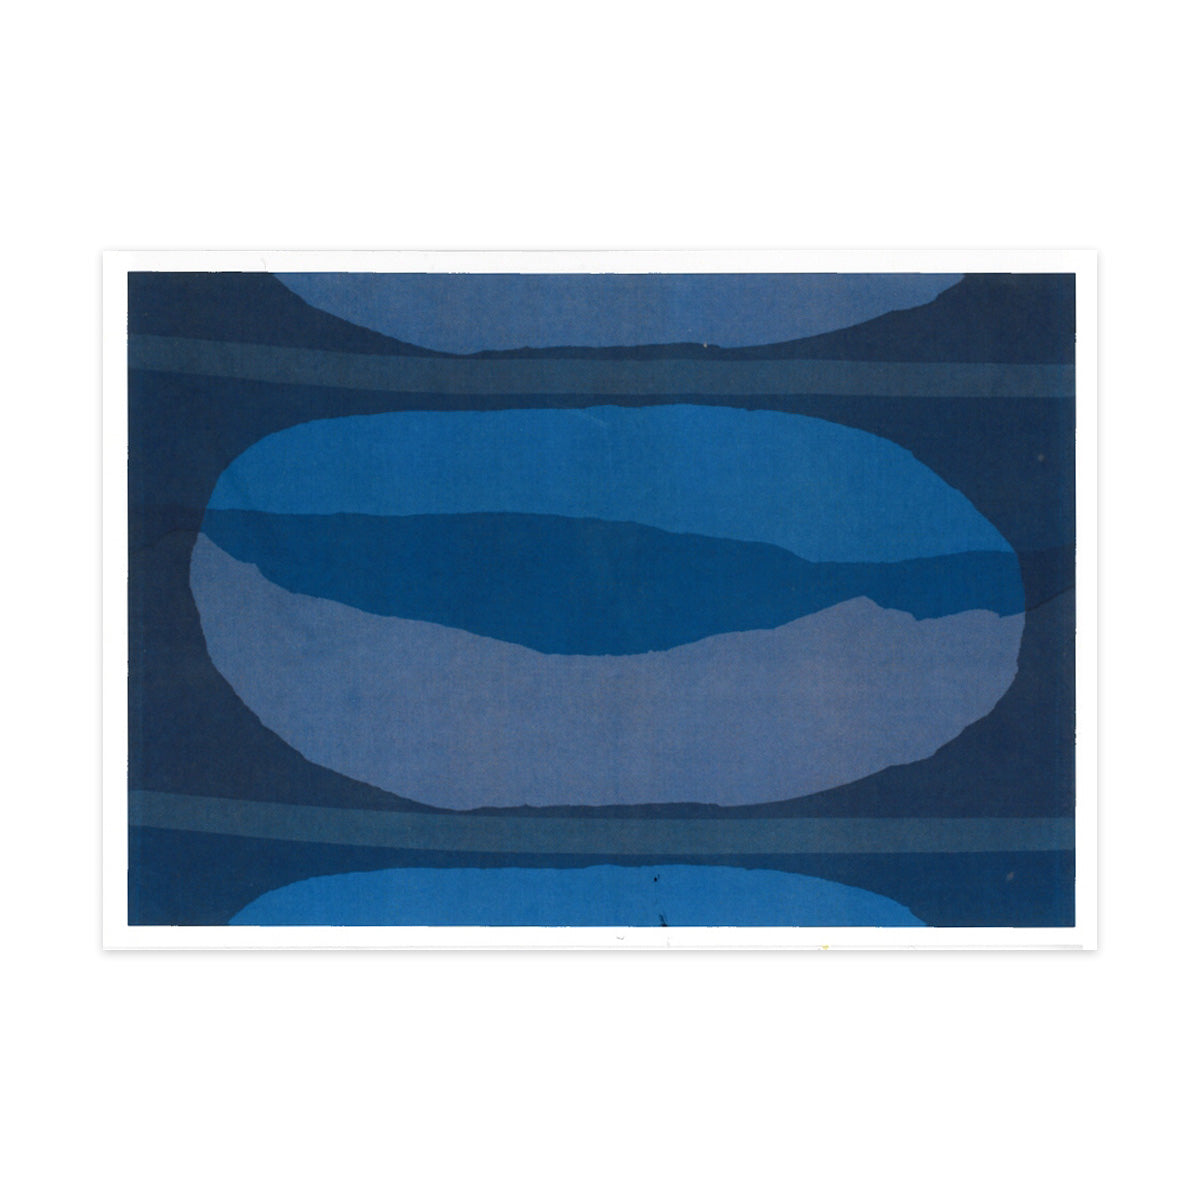 Landscape greetings card featuring Shirley Craven blue abstract Kaplan textile design.